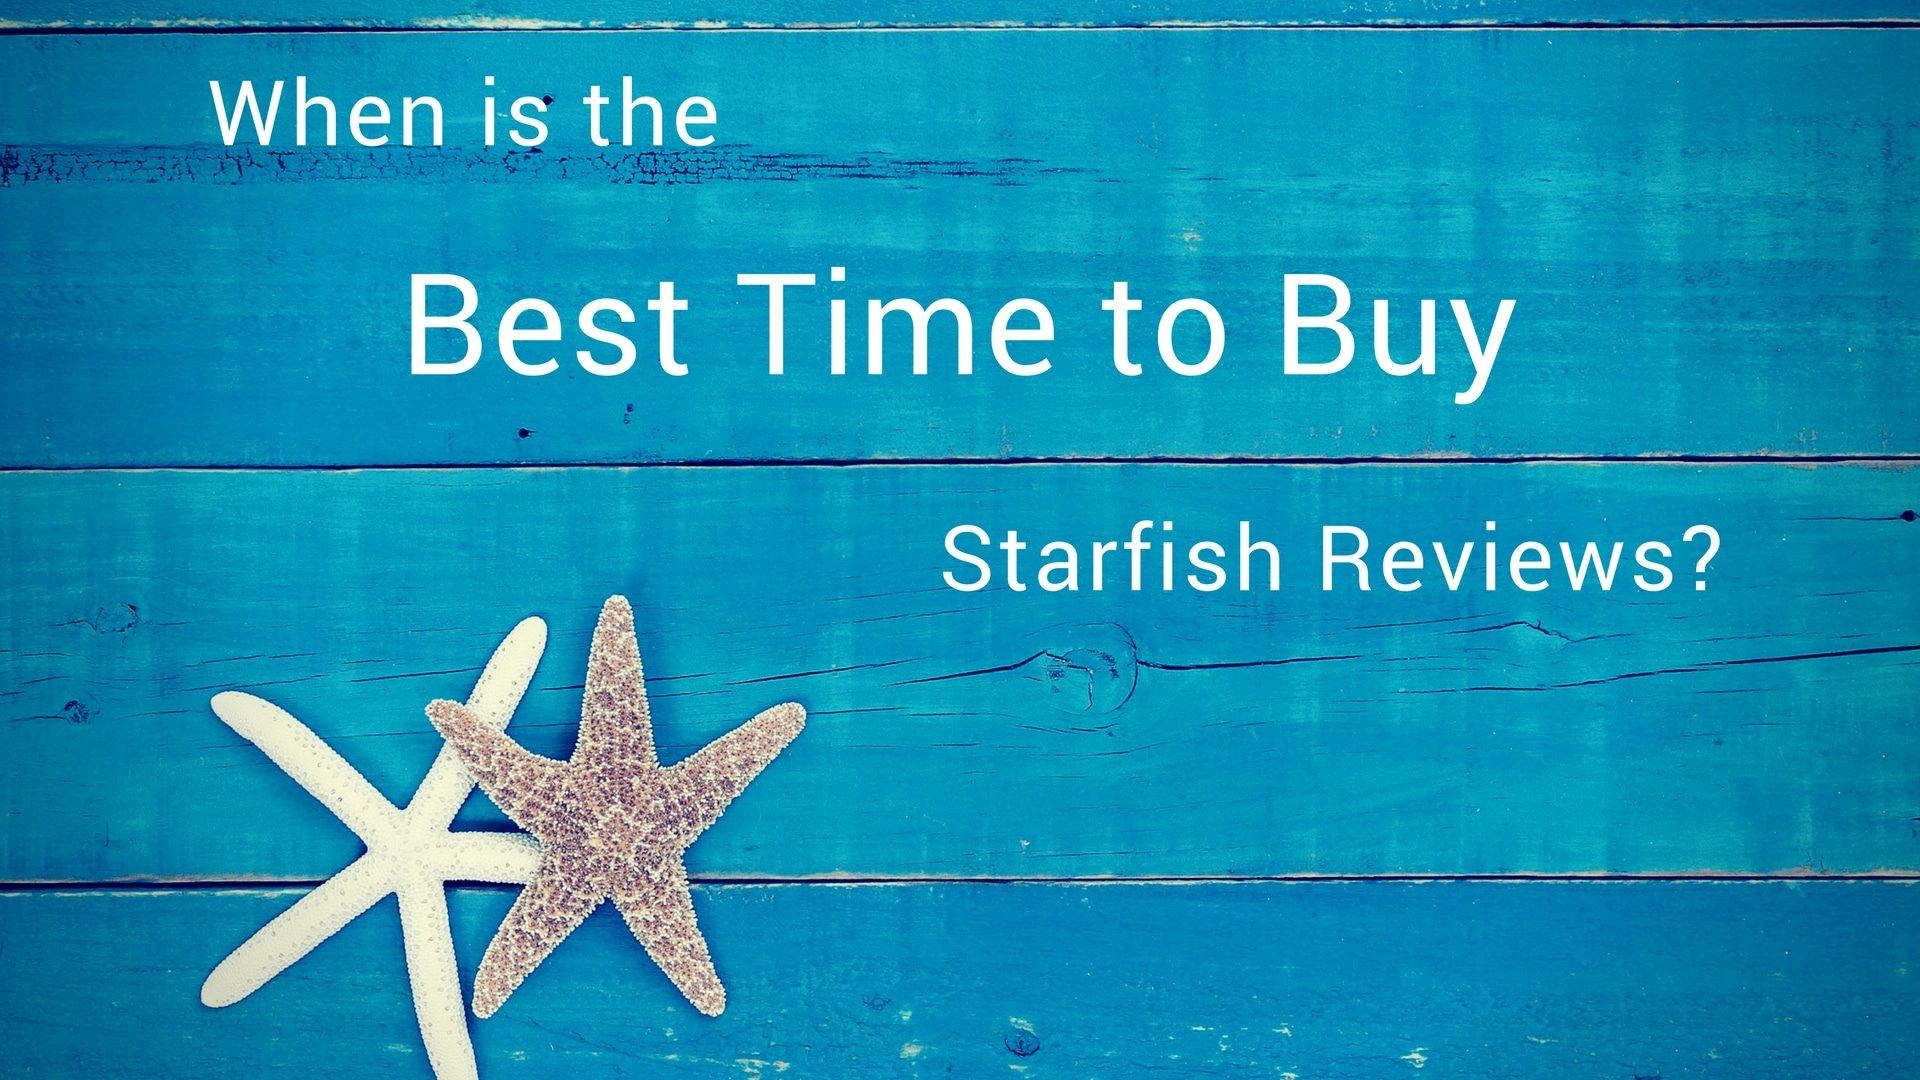 best time to buy Starfish Reviews e1553970832305